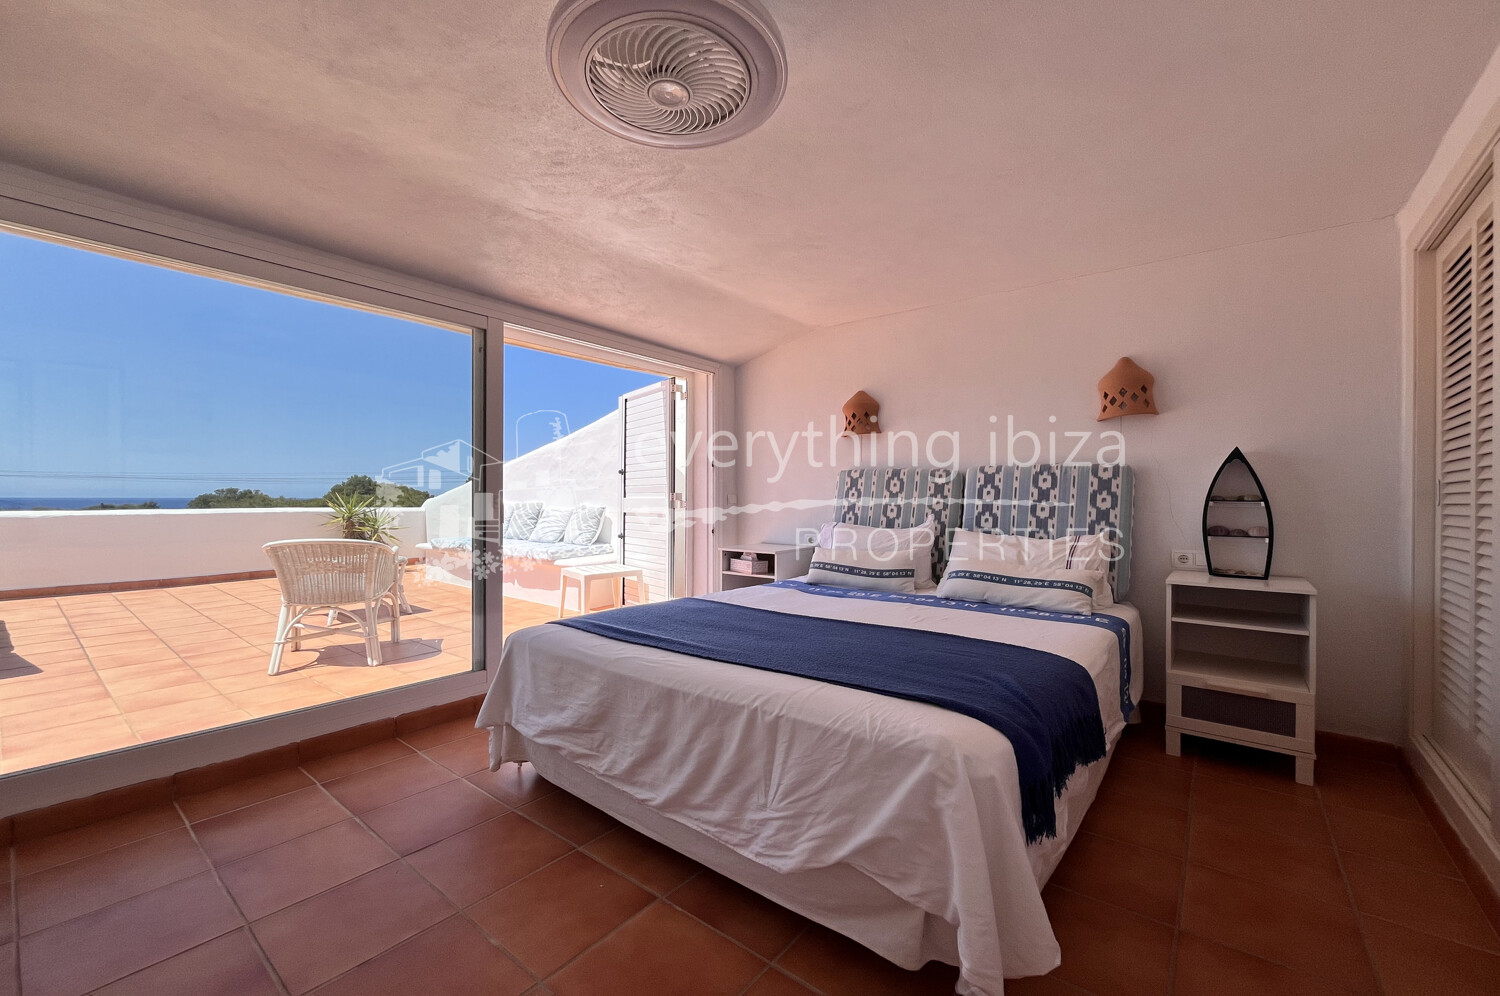 Elegant Traditional Semi Detached House with Lots of Charm and Es Vedra Views, ref. 1707, for sale in Ibiza by everything ibiza Properties